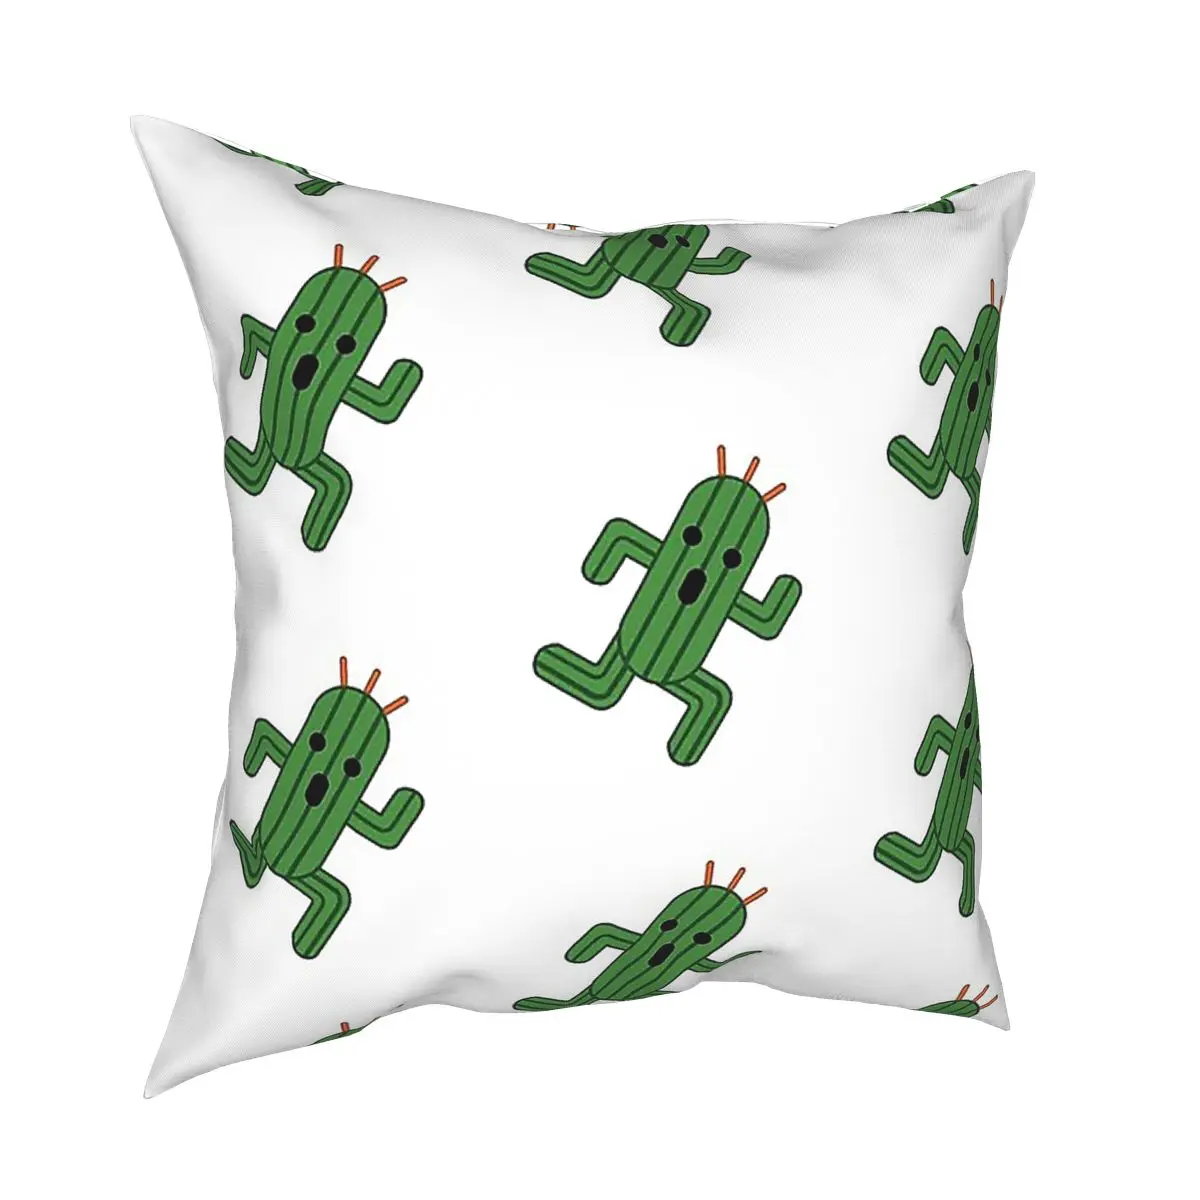 Cactuar Final Fantasy Pillow Case Home Decor Game Cushion Cover Throw Pillow for Living Room Double-sided Printing Leisure